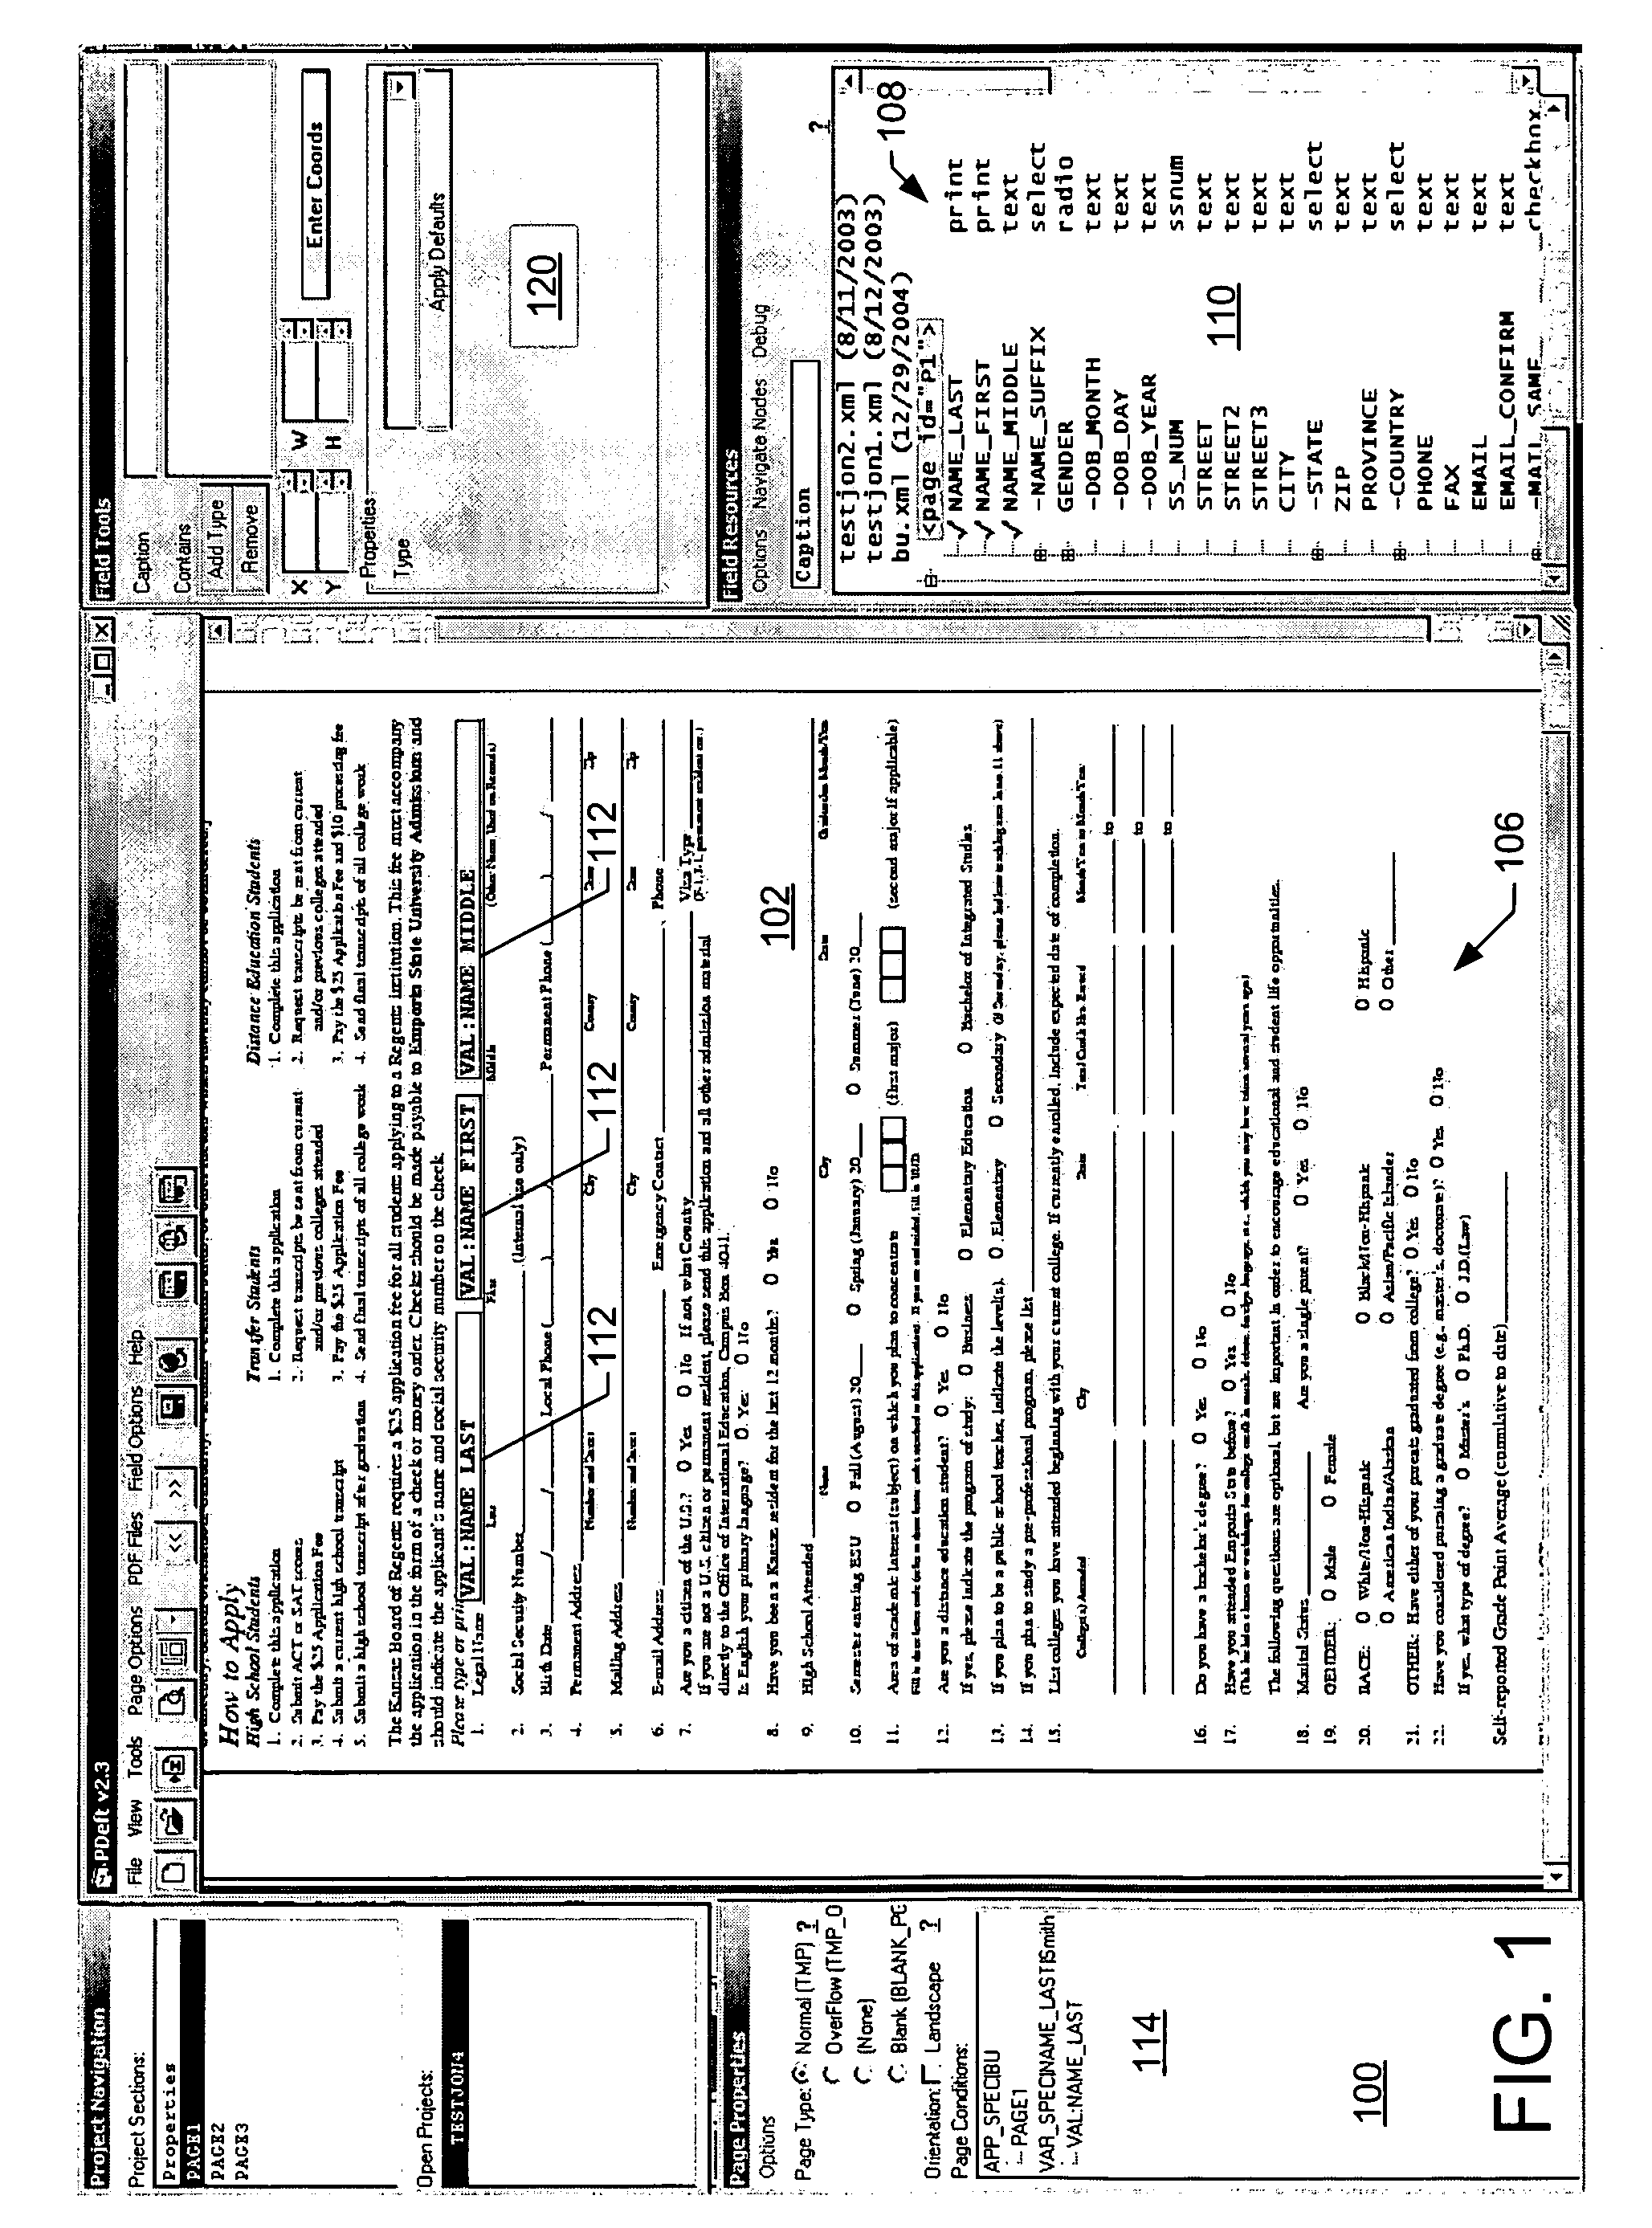 System for describing the overlaying of electronic data onto an electronic image